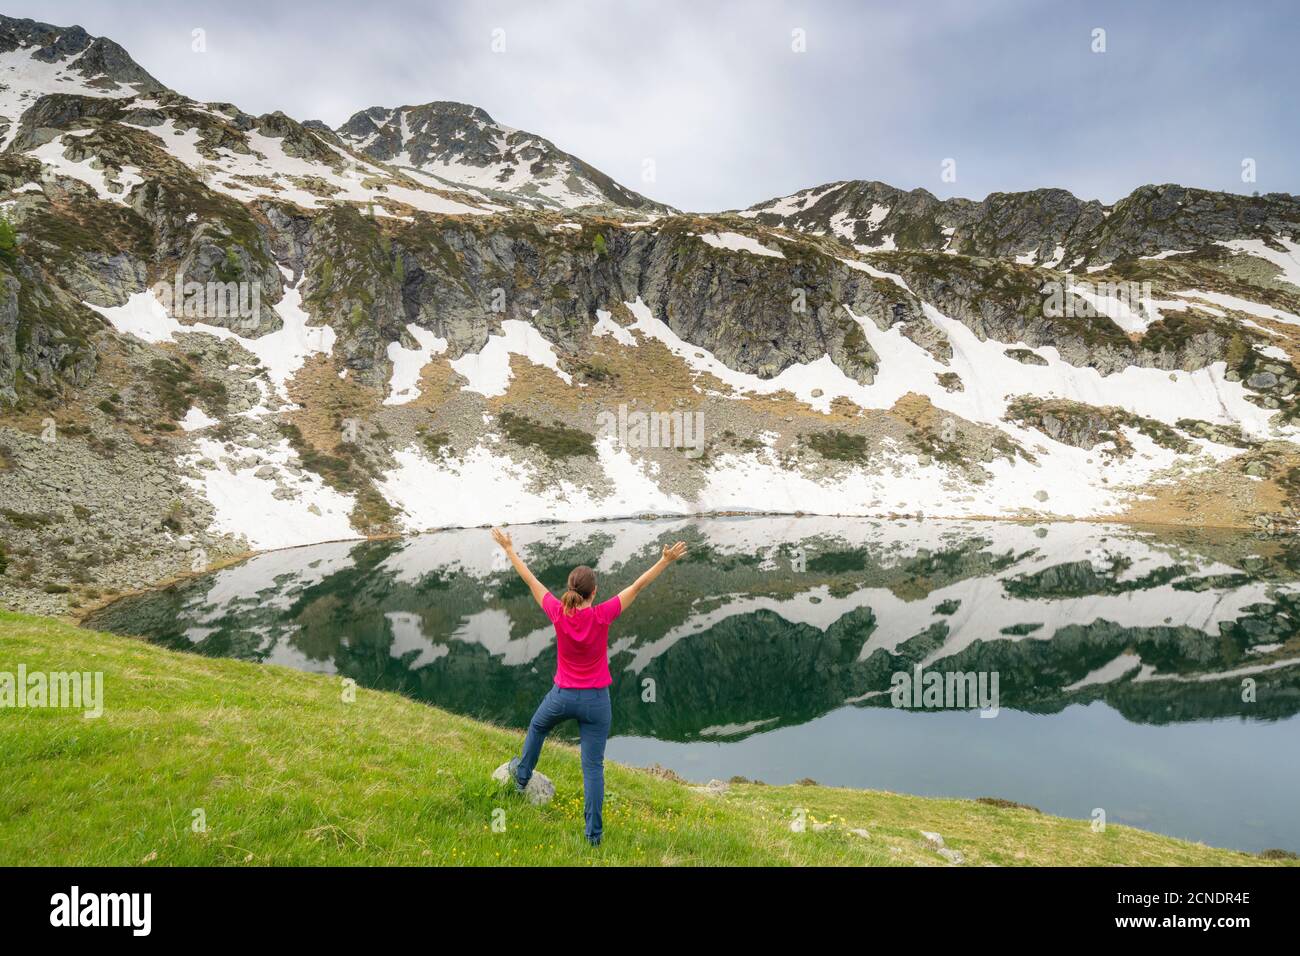 Cheerful woman with outstretched arms standing on the shores of Porcile Lakes, Tartano Valley, Valtellina, Lombardy, Italy, Europe Stock Photo